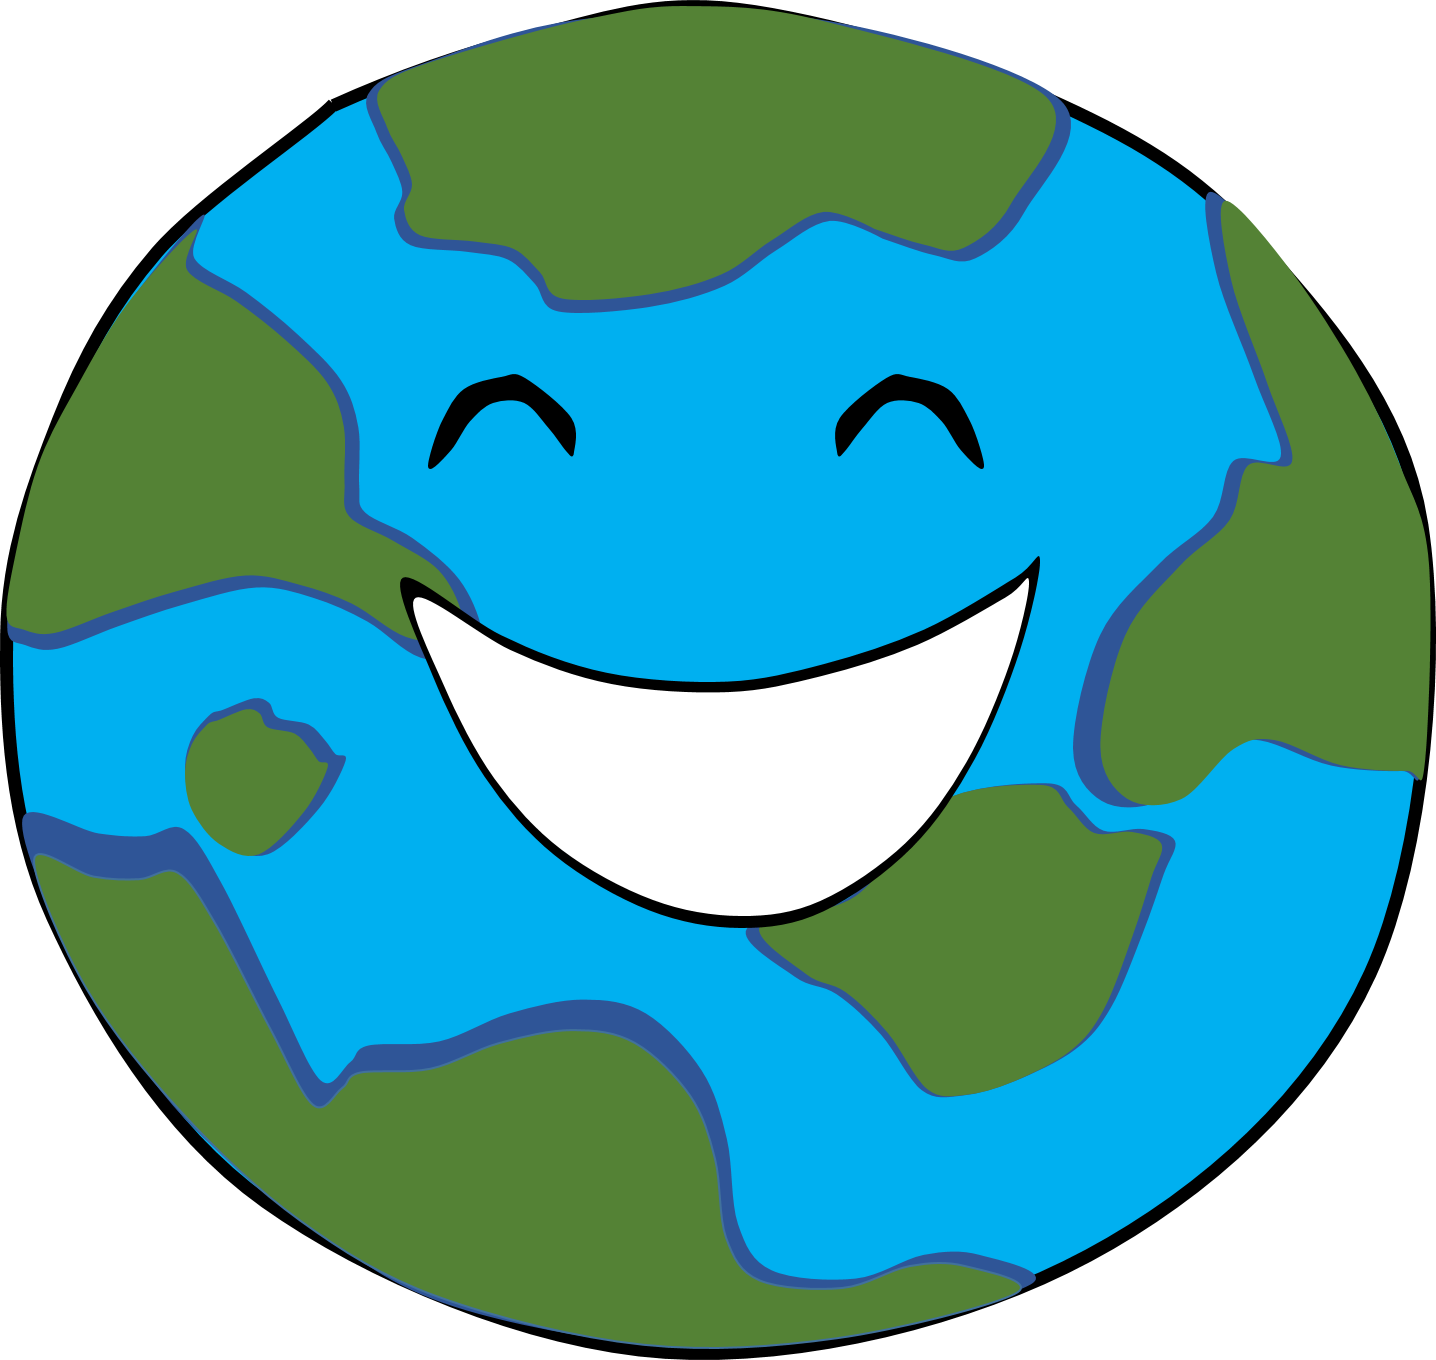 Earth clipart happy, Earth happy Transparent FREE for